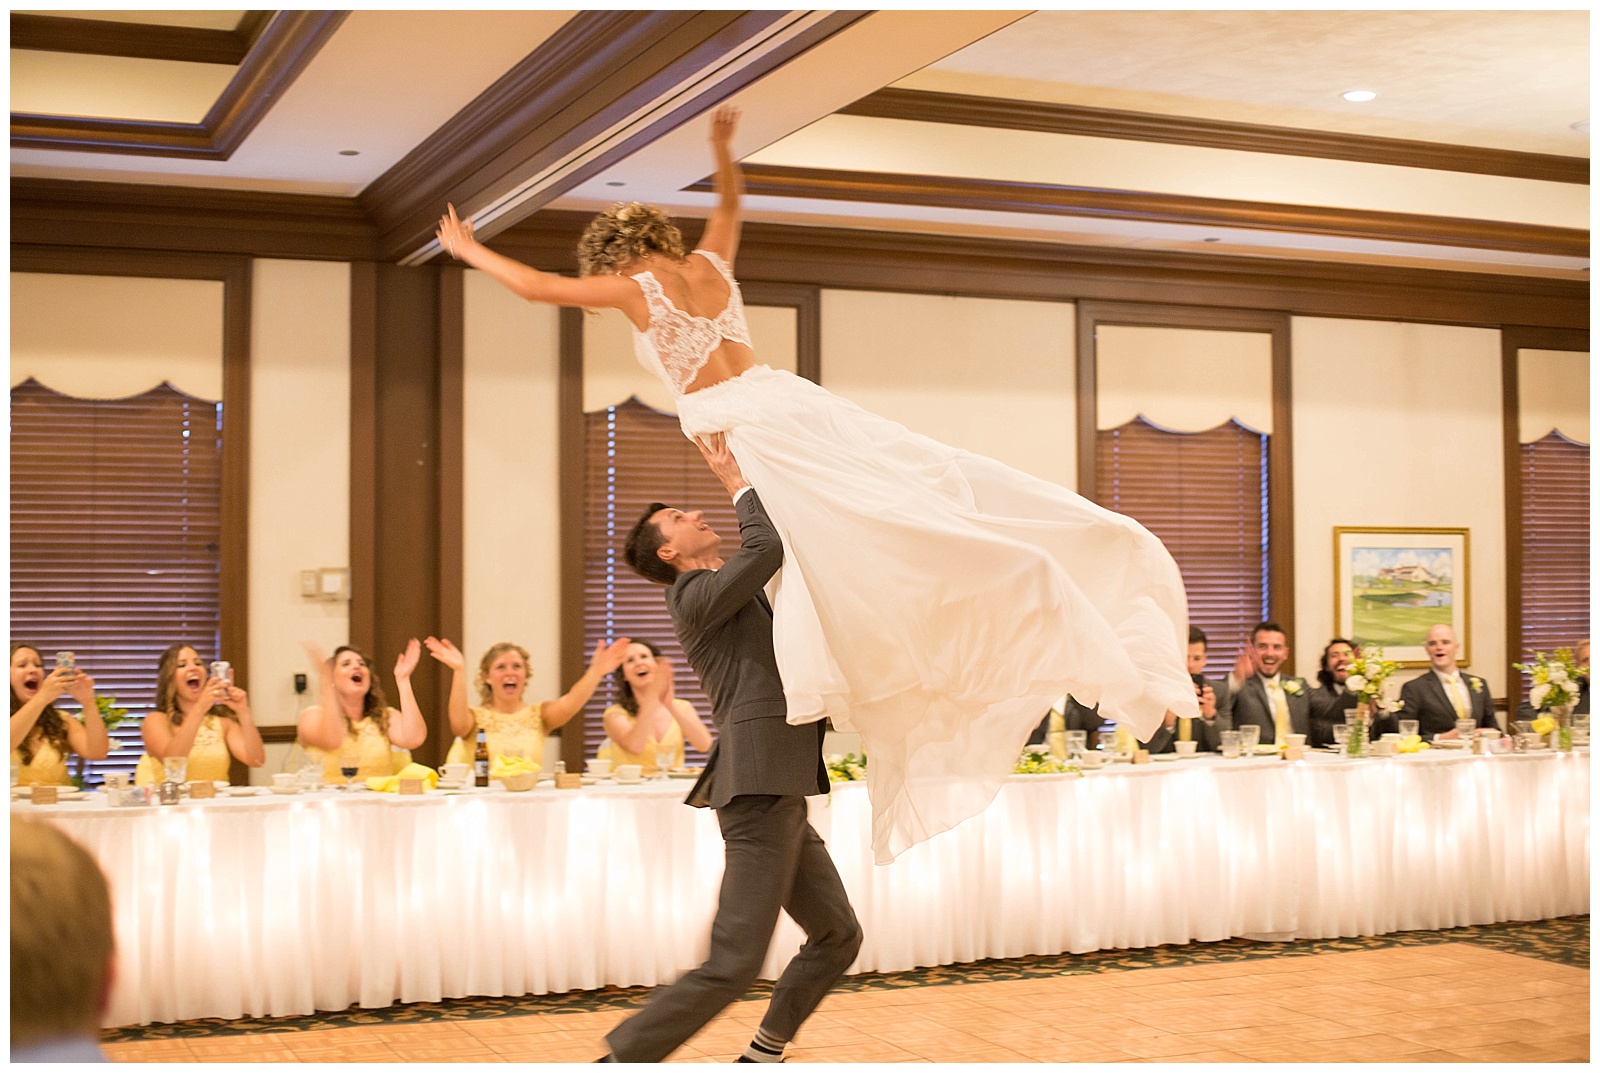 Golf Course Wedding - Midwest | Monica Brown Photography | monicabrownphoto.com